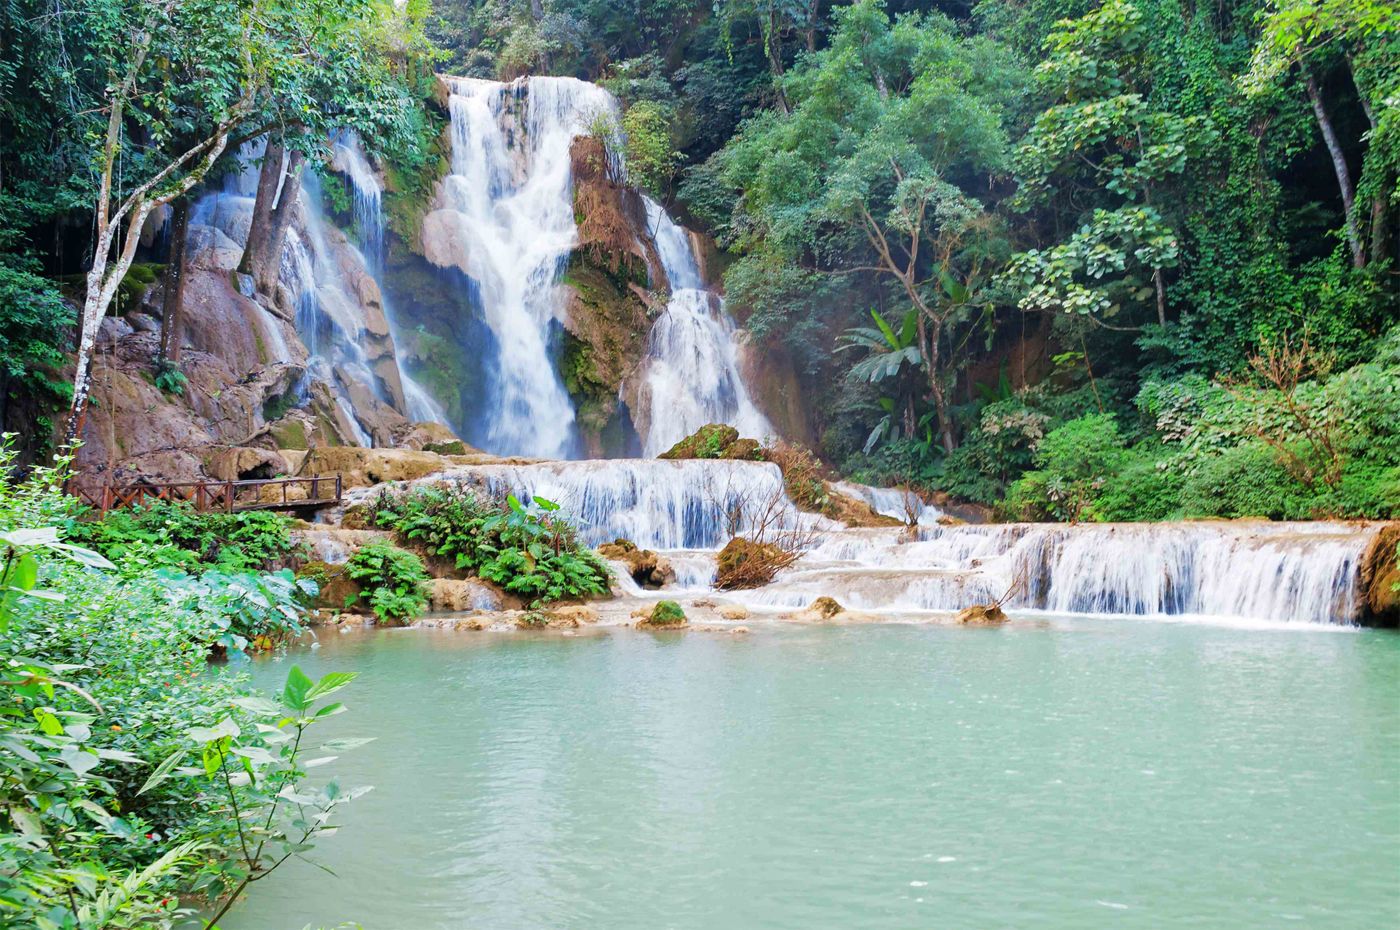 Where to visit first in Laos